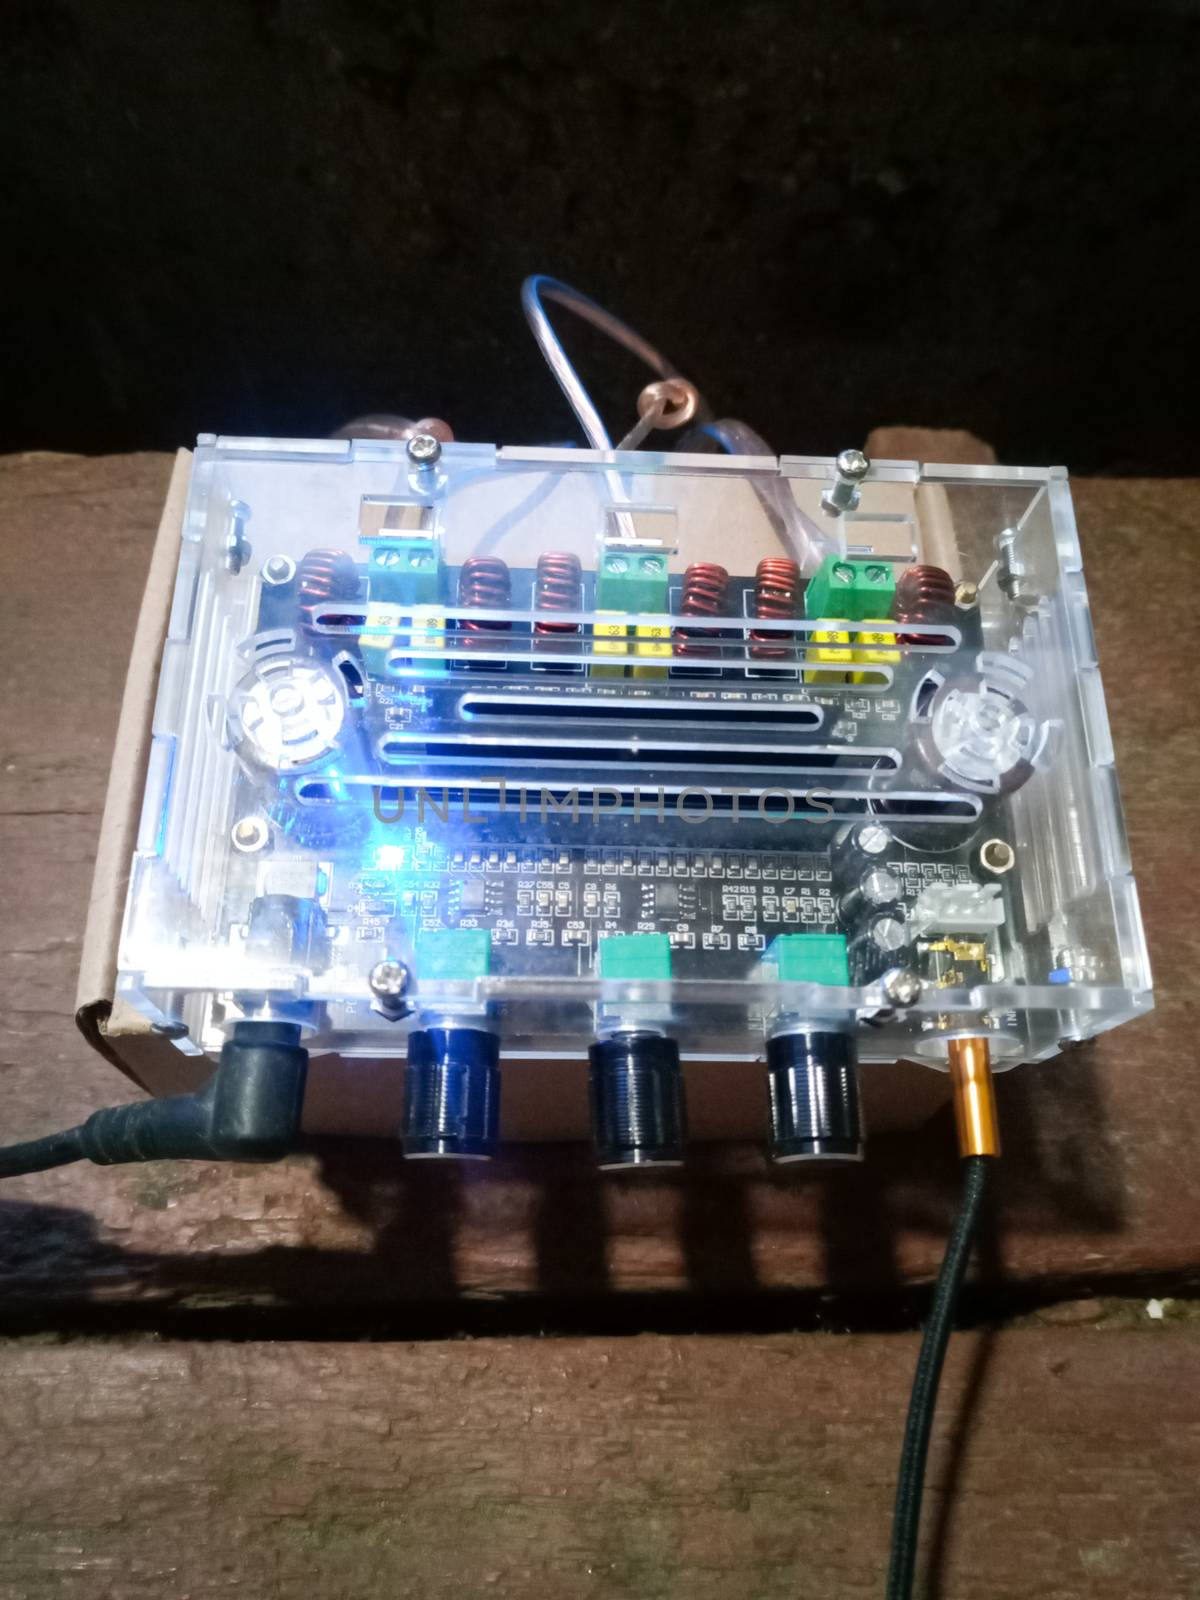 A small musical power amplifier in a plastic case.